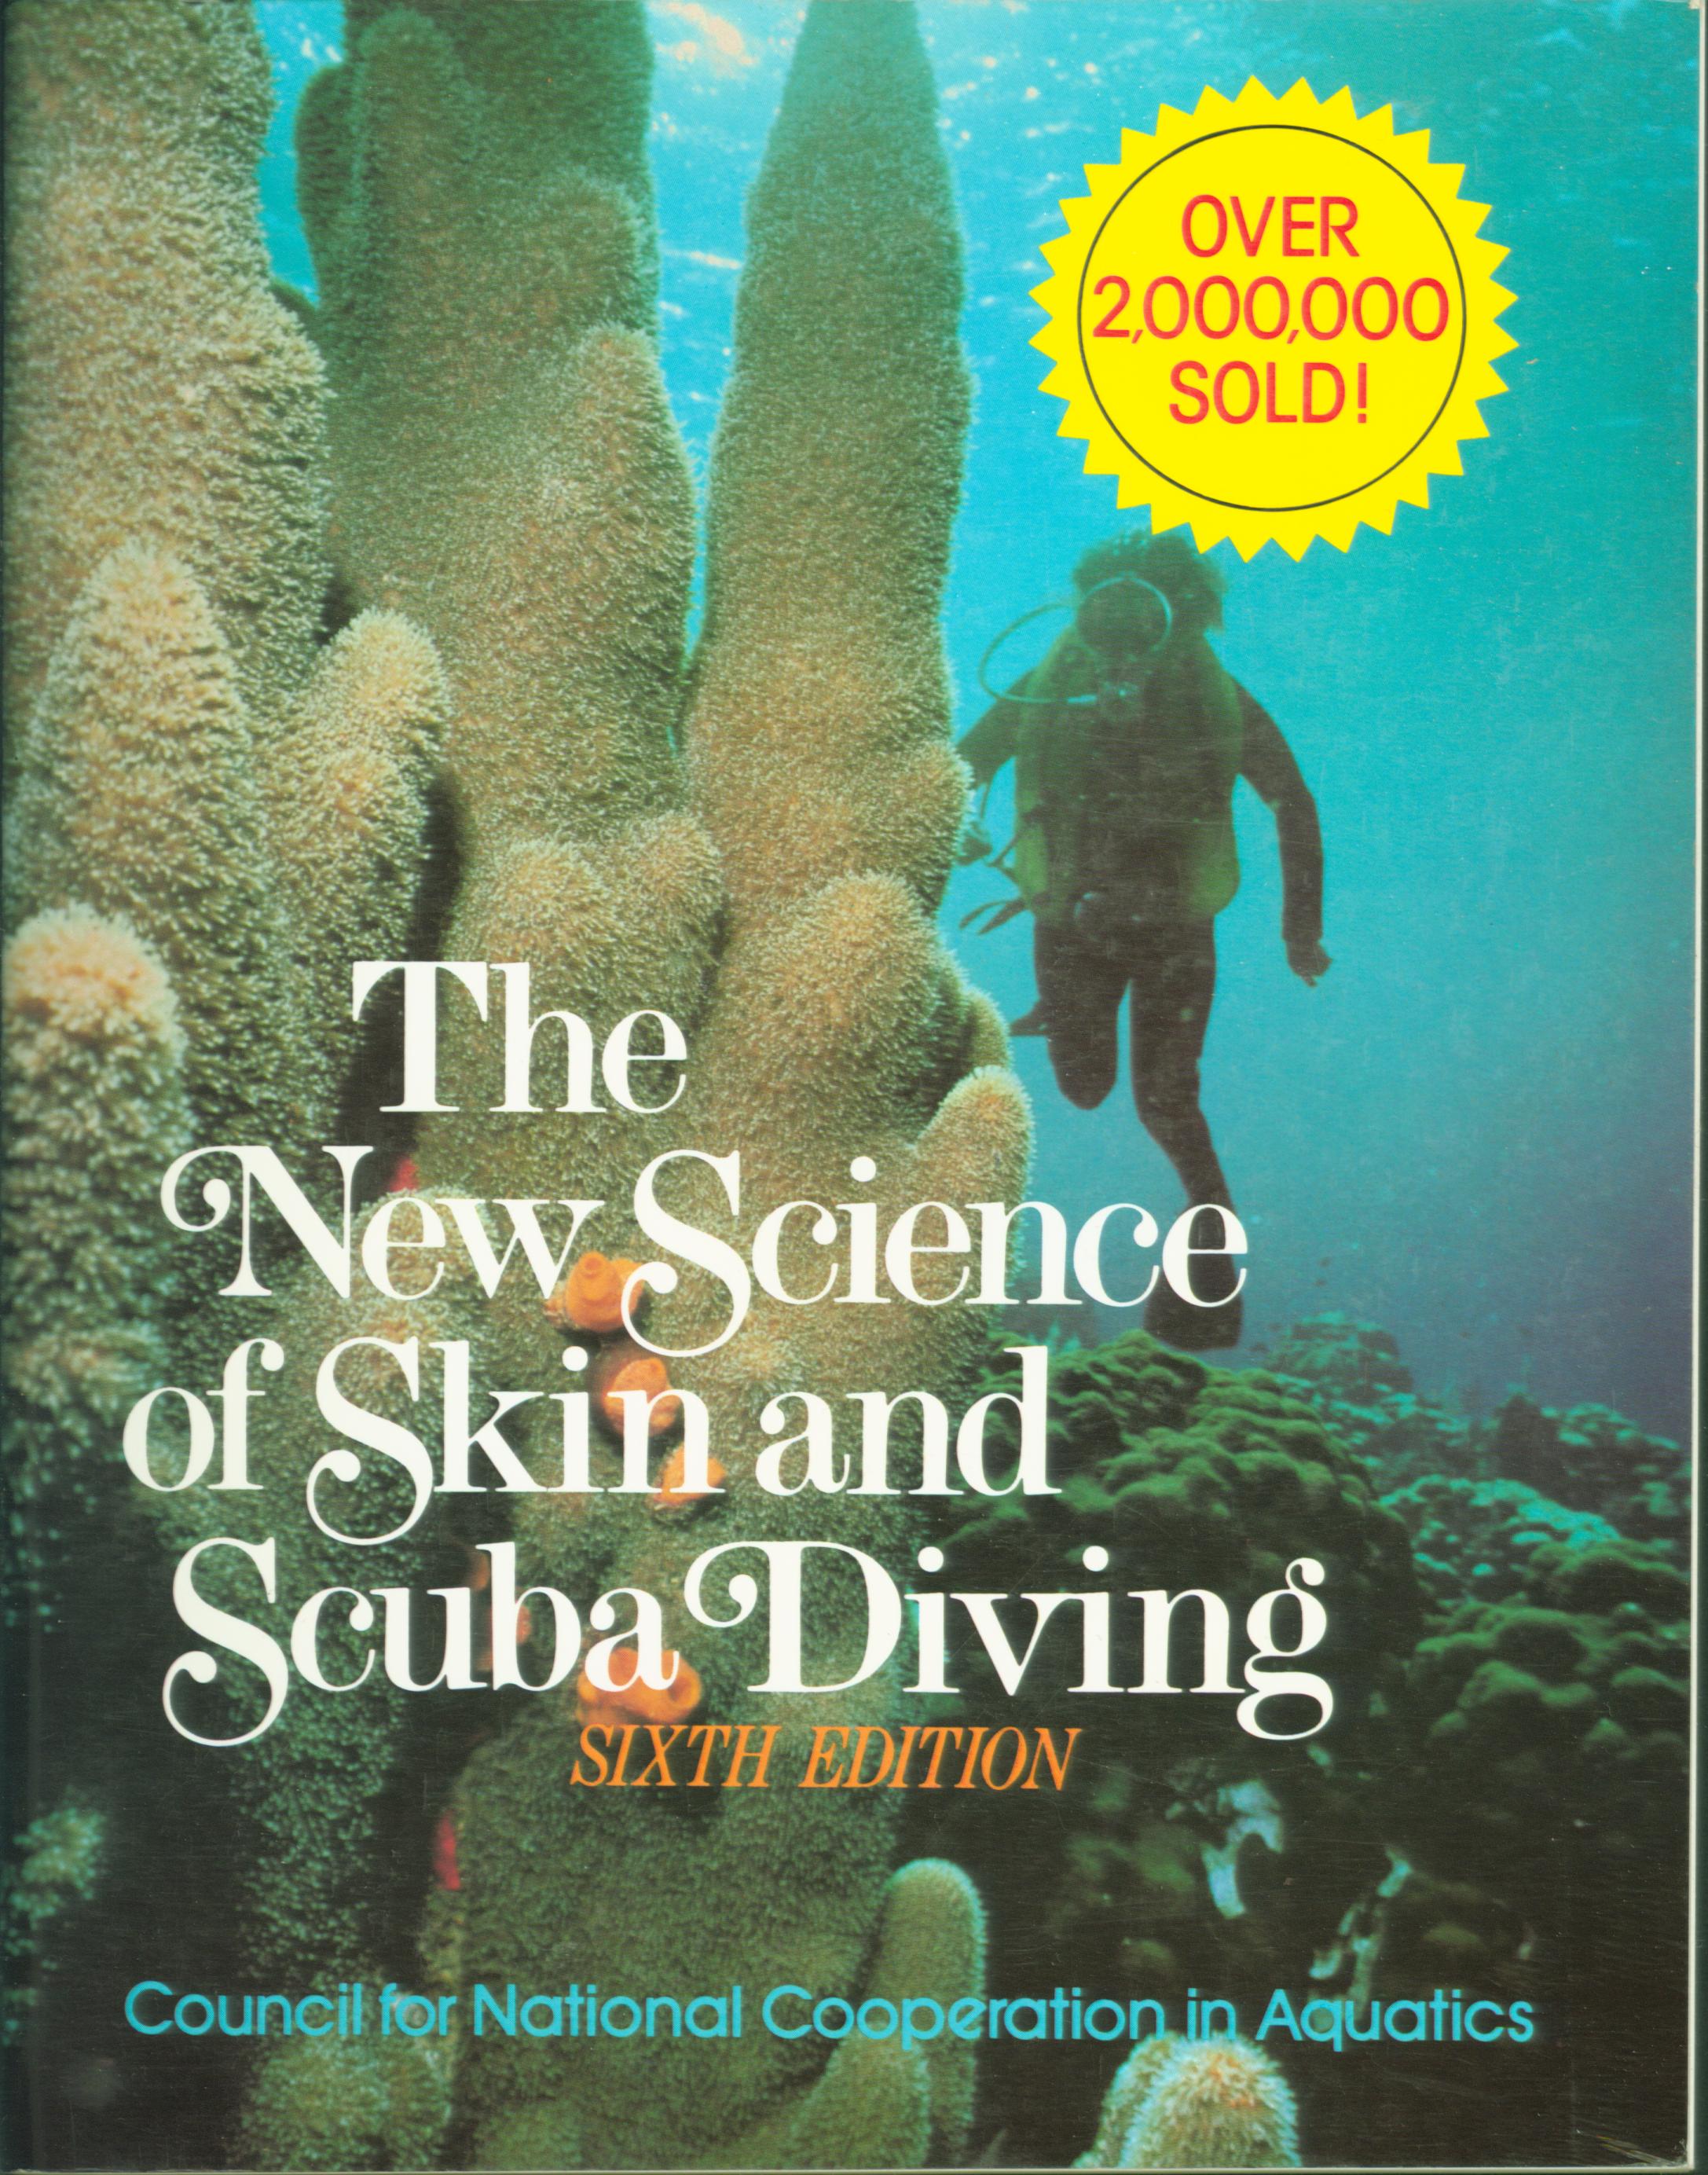 THE NEW SCIENCE OF SKIN AND SCUBA DIVING.